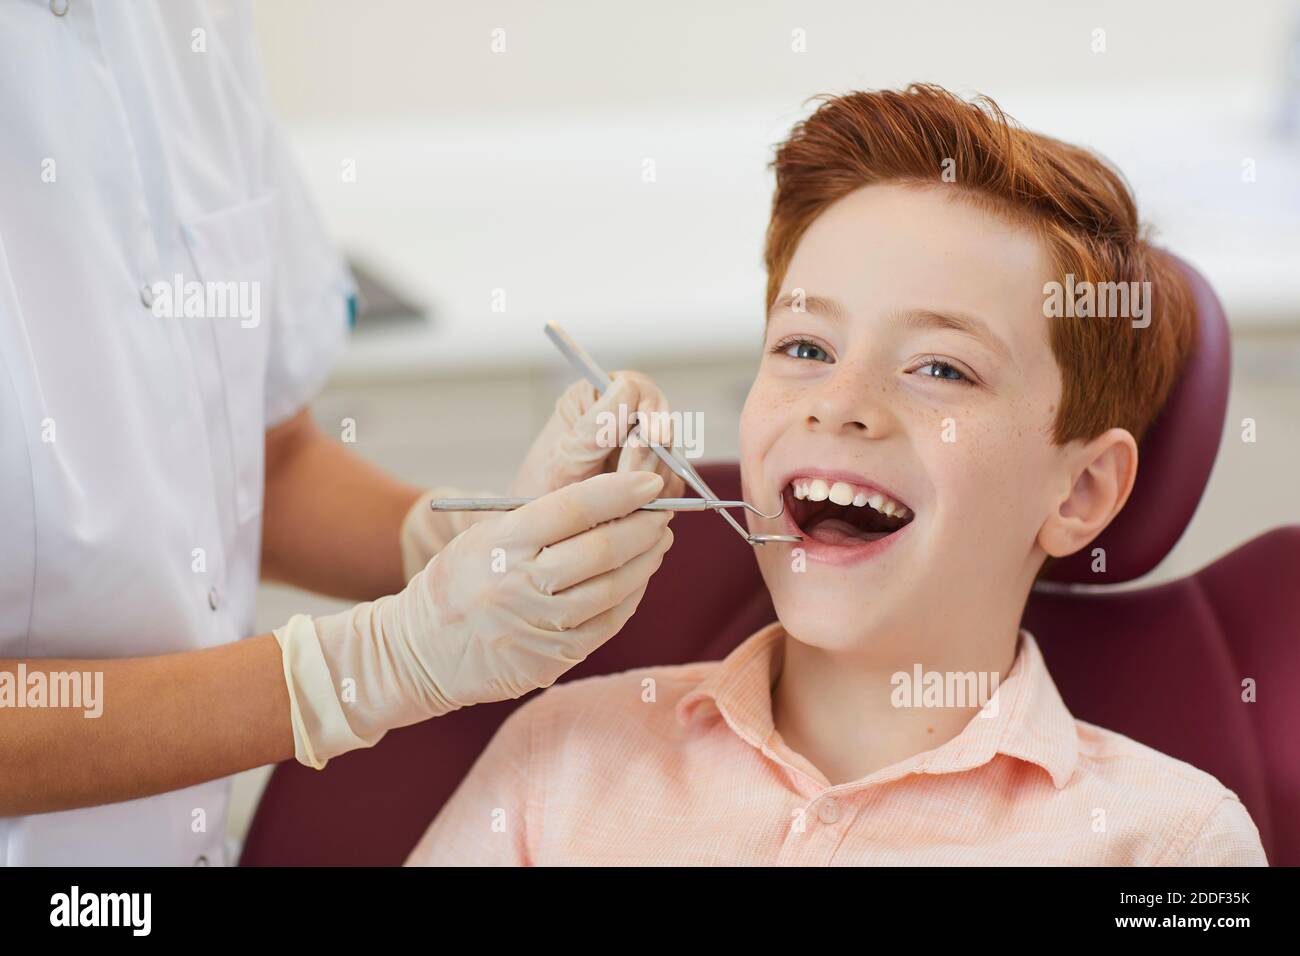 Dental clinic. Smiling boy getting examination of teeth from woman dentist Stock Photo